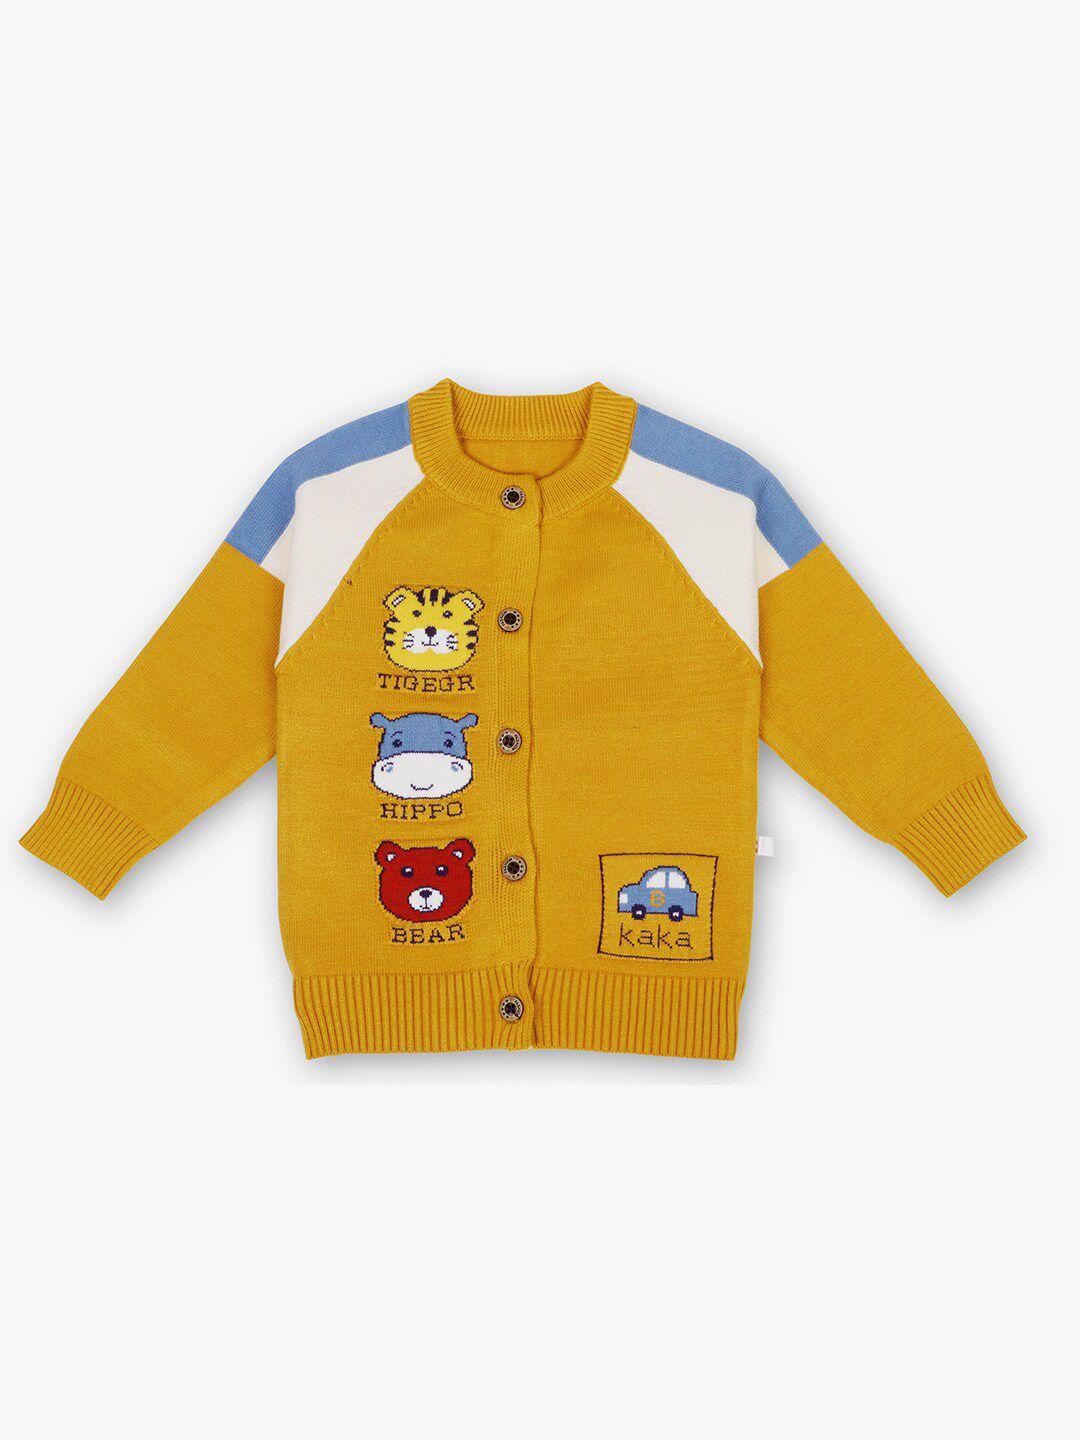 pokory-unisex-kids-assorted-humour-and-comic-printed-pure-cotton-cardigan